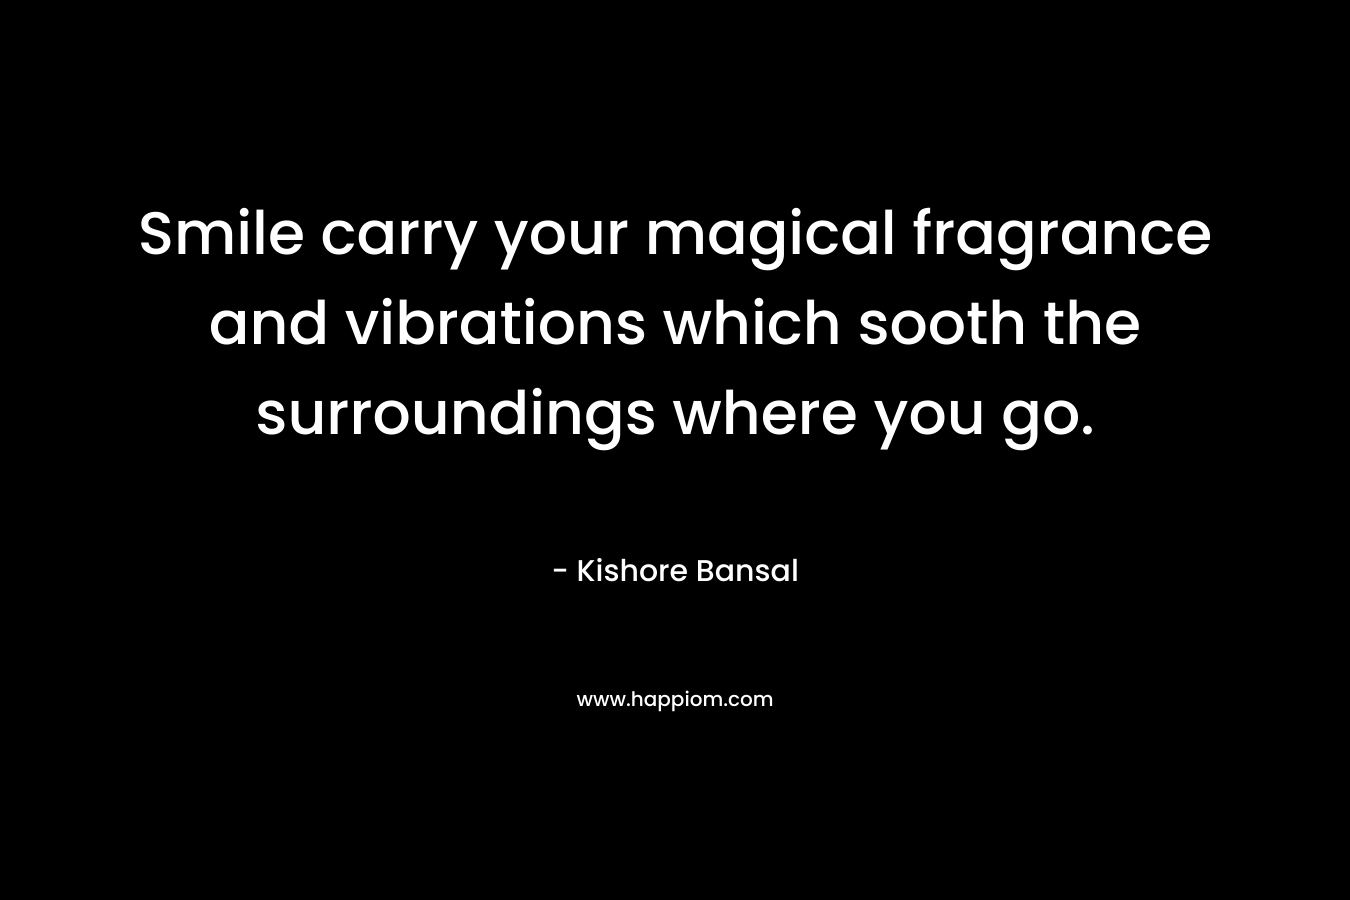 Smile carry your magical fragrance and vibrations which sooth the surroundings where you go. – Kishore Bansal